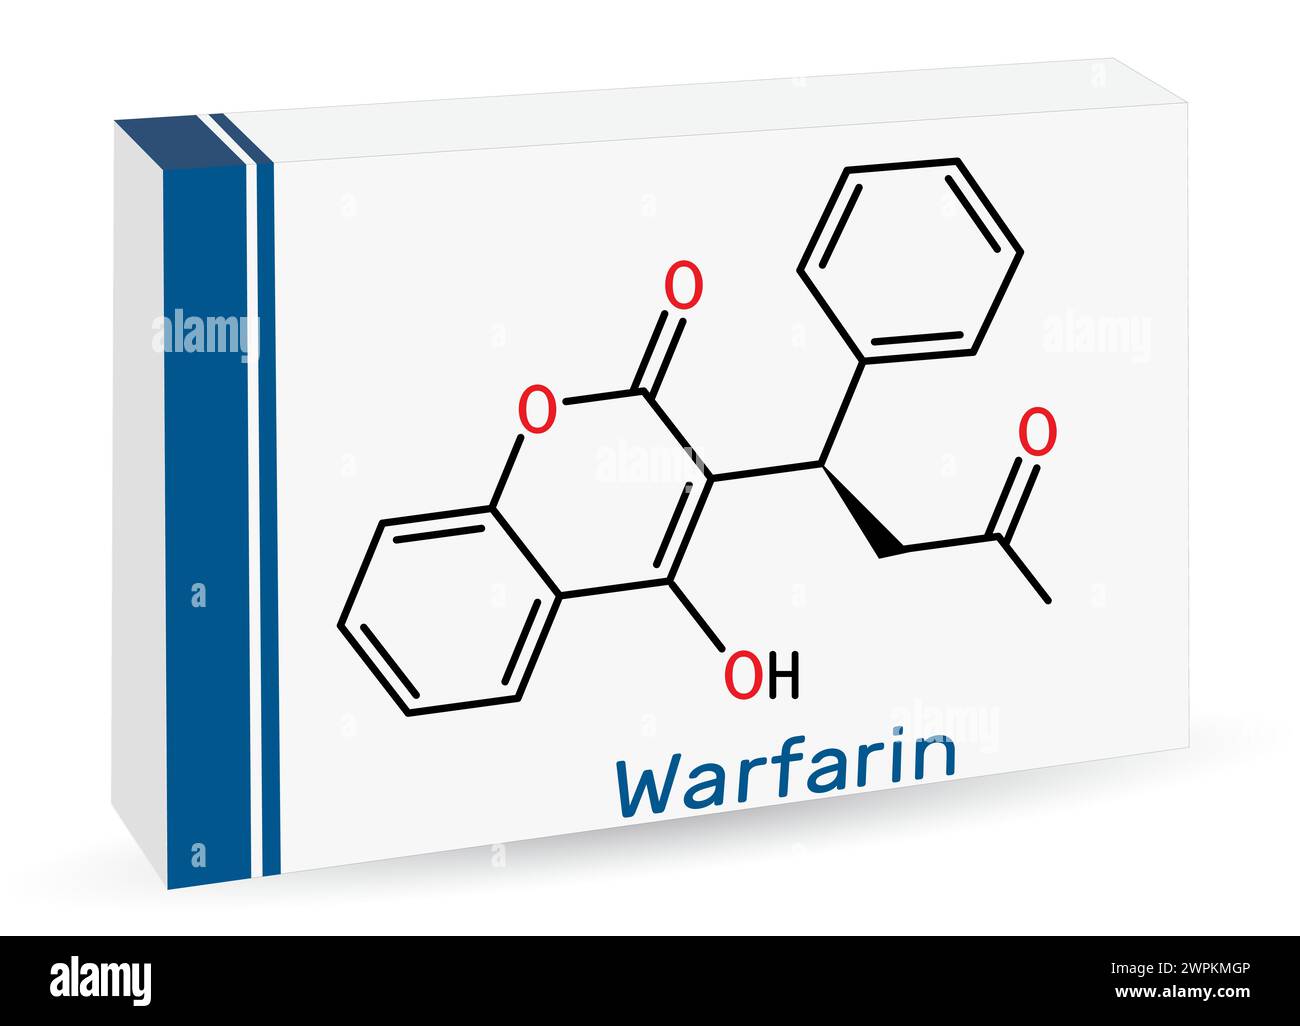 Warfarin drug molecule. Warfarin is an anticoagulant, used to prevent blood clot formation. Skeletal chemical formula. Paper packaging for drugs. Vect Stock Vector